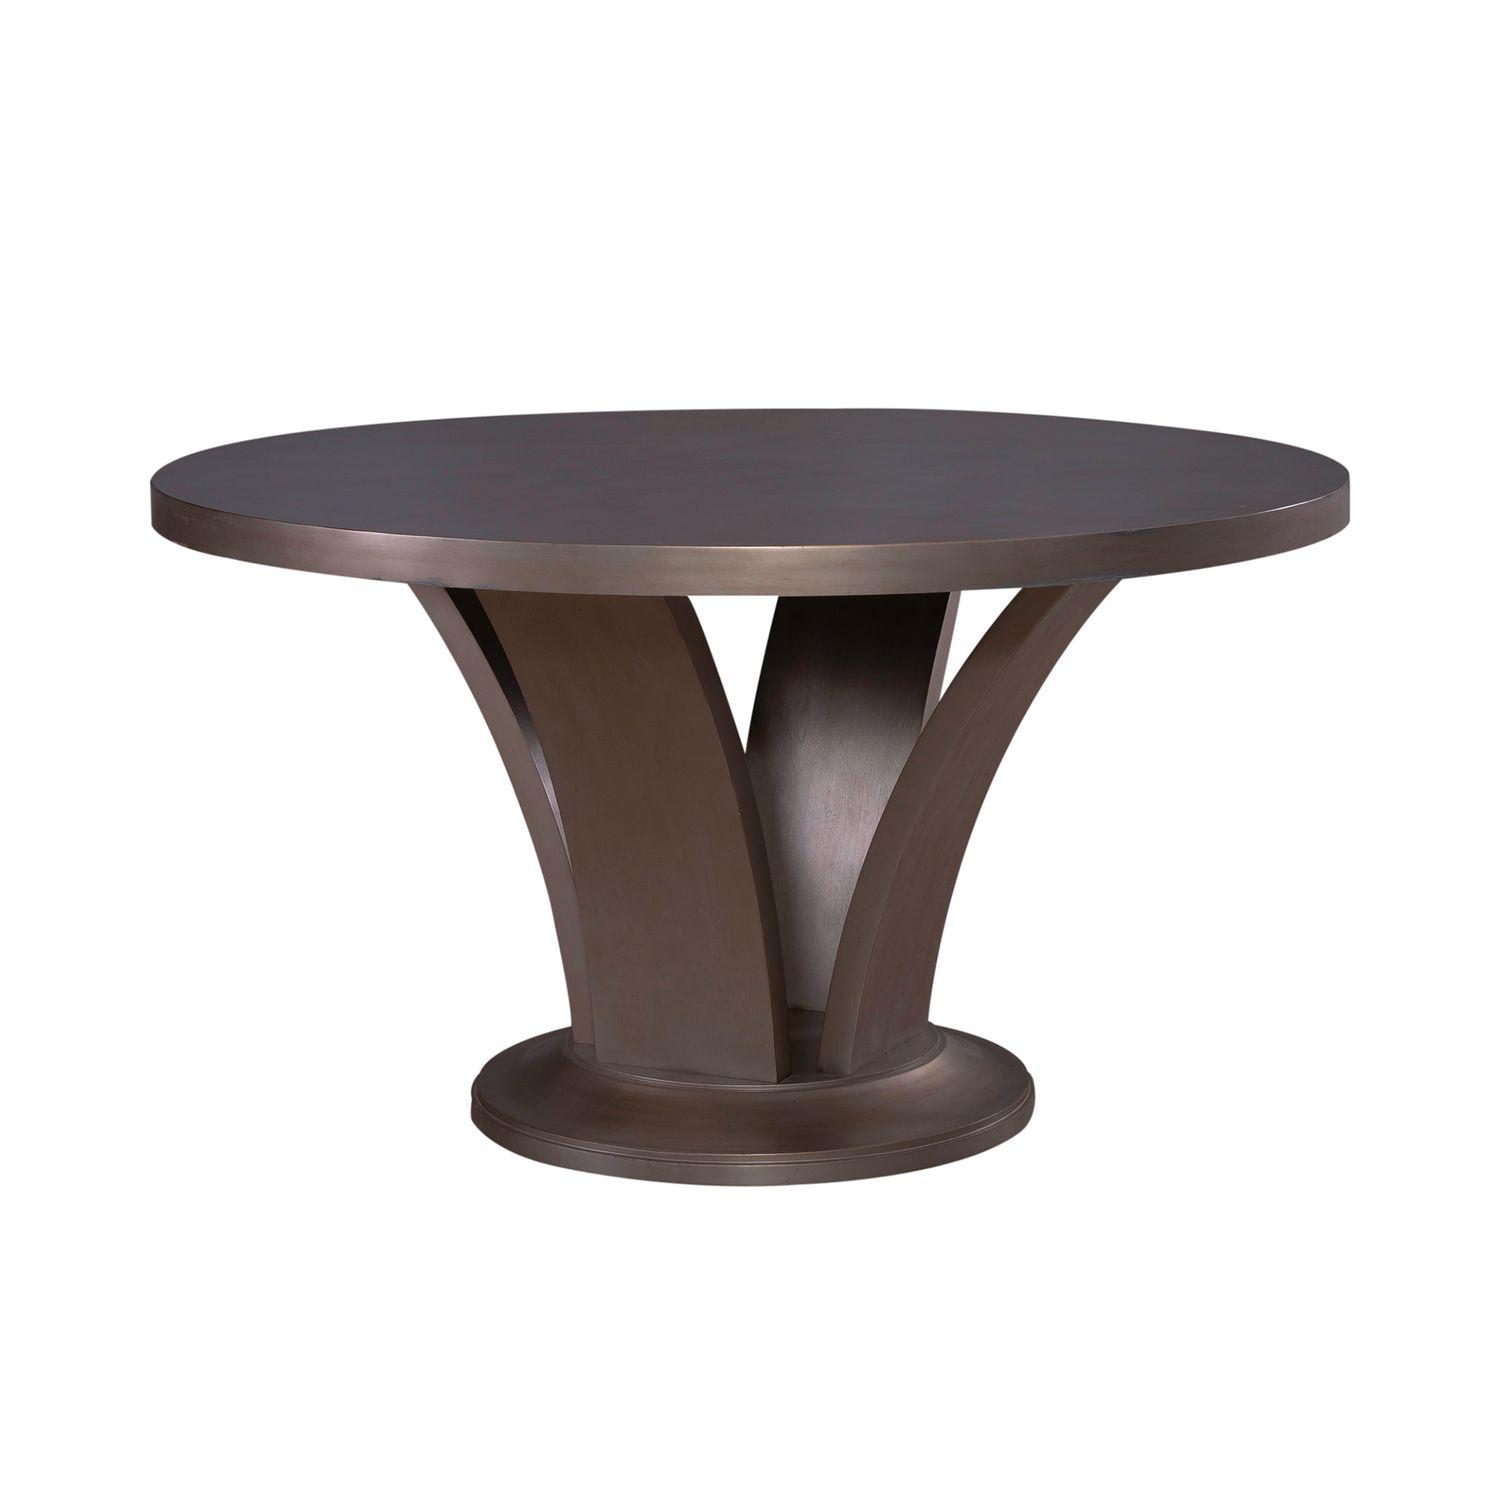 Contemporary Round table Montage Round Dining Table 849-T5454-RT 849-T5454-RT in Platinum 